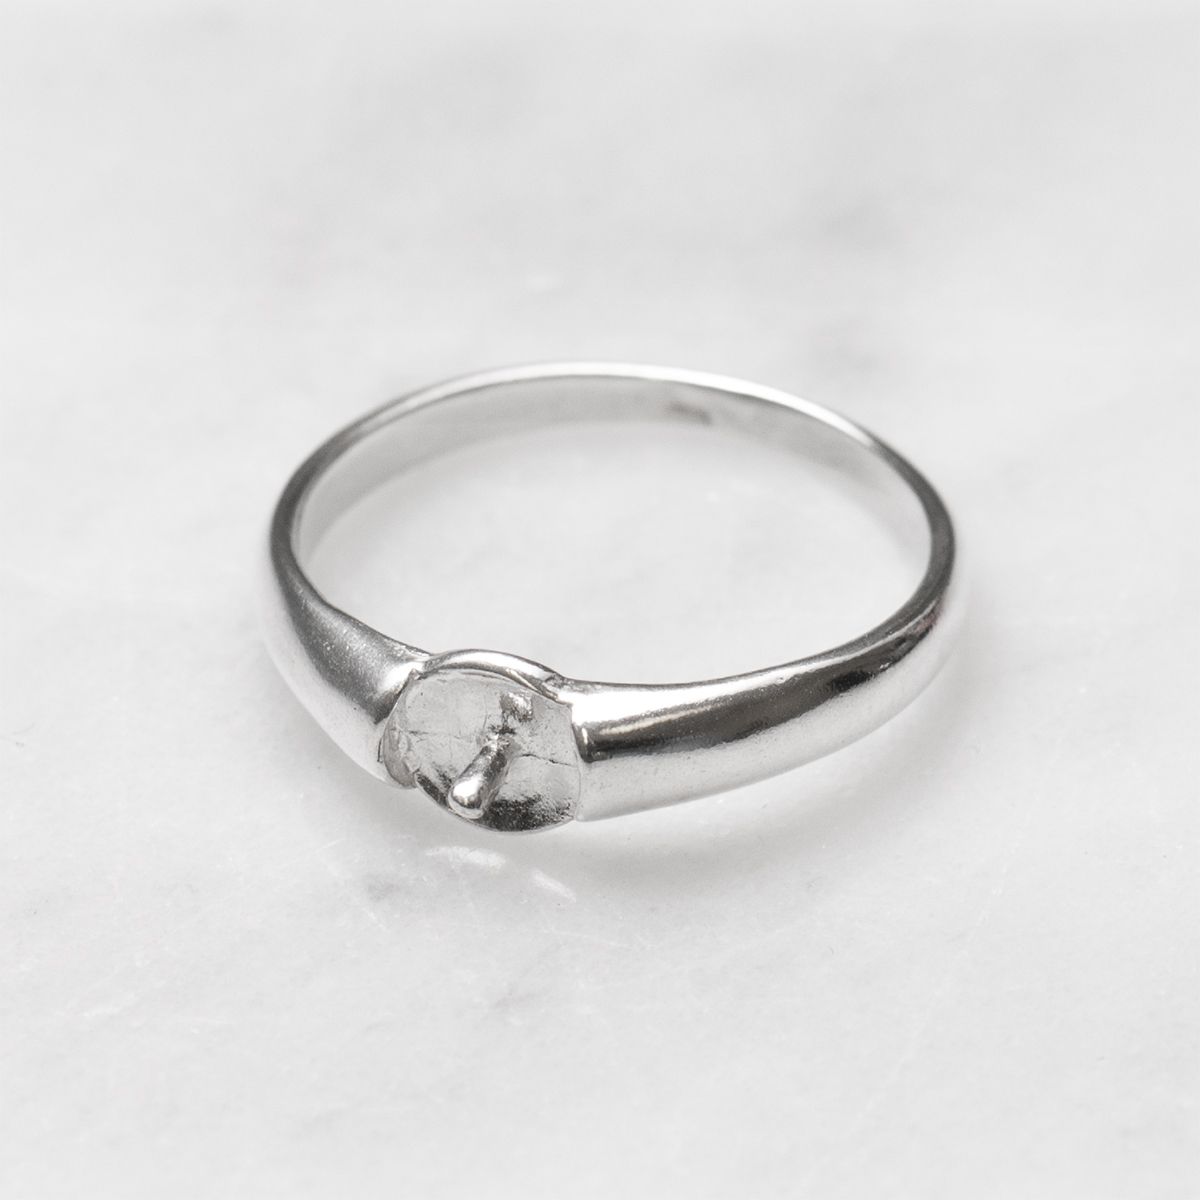 Sterling Silver Ring for One 4mm To 8mm Half Drilled Bead